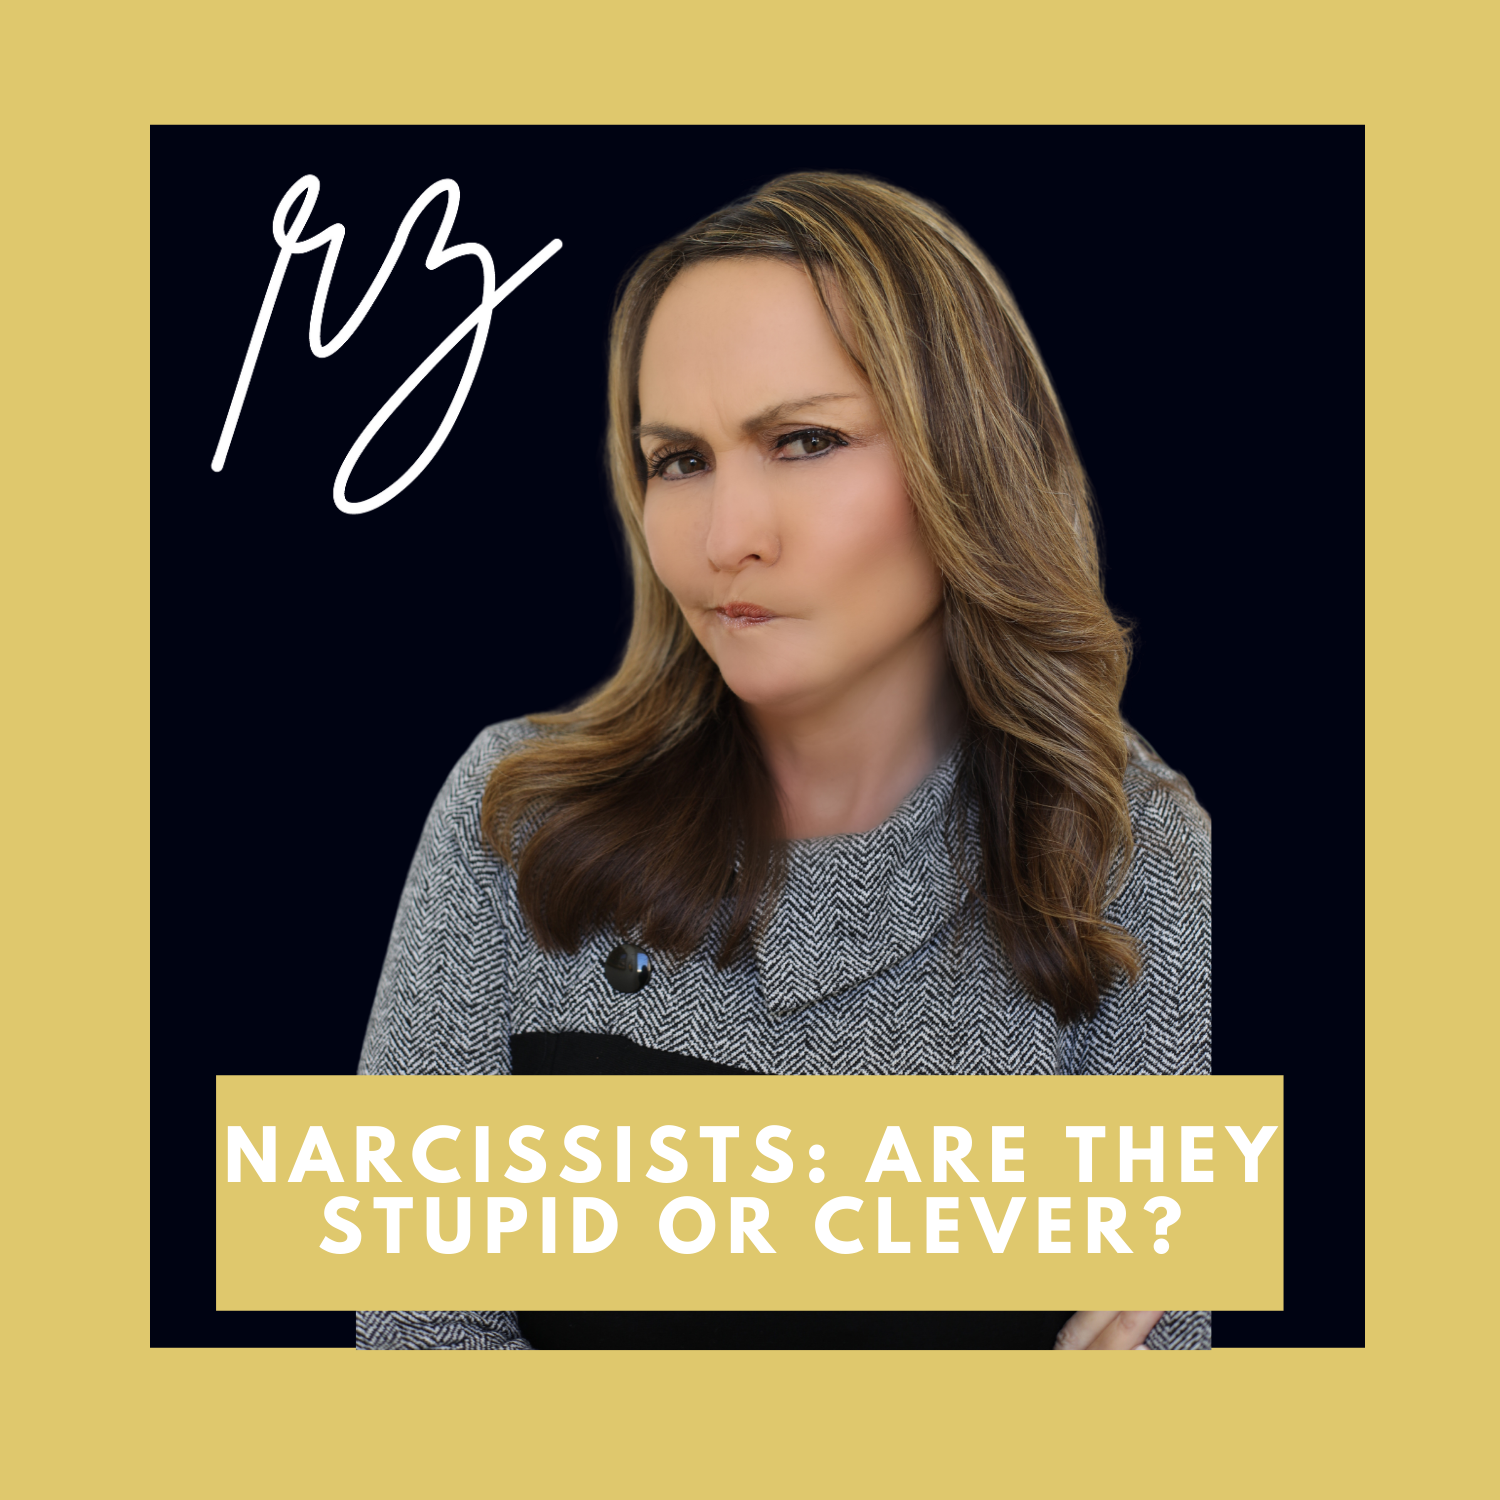 Narcissists: Are They Stupid or Clever?